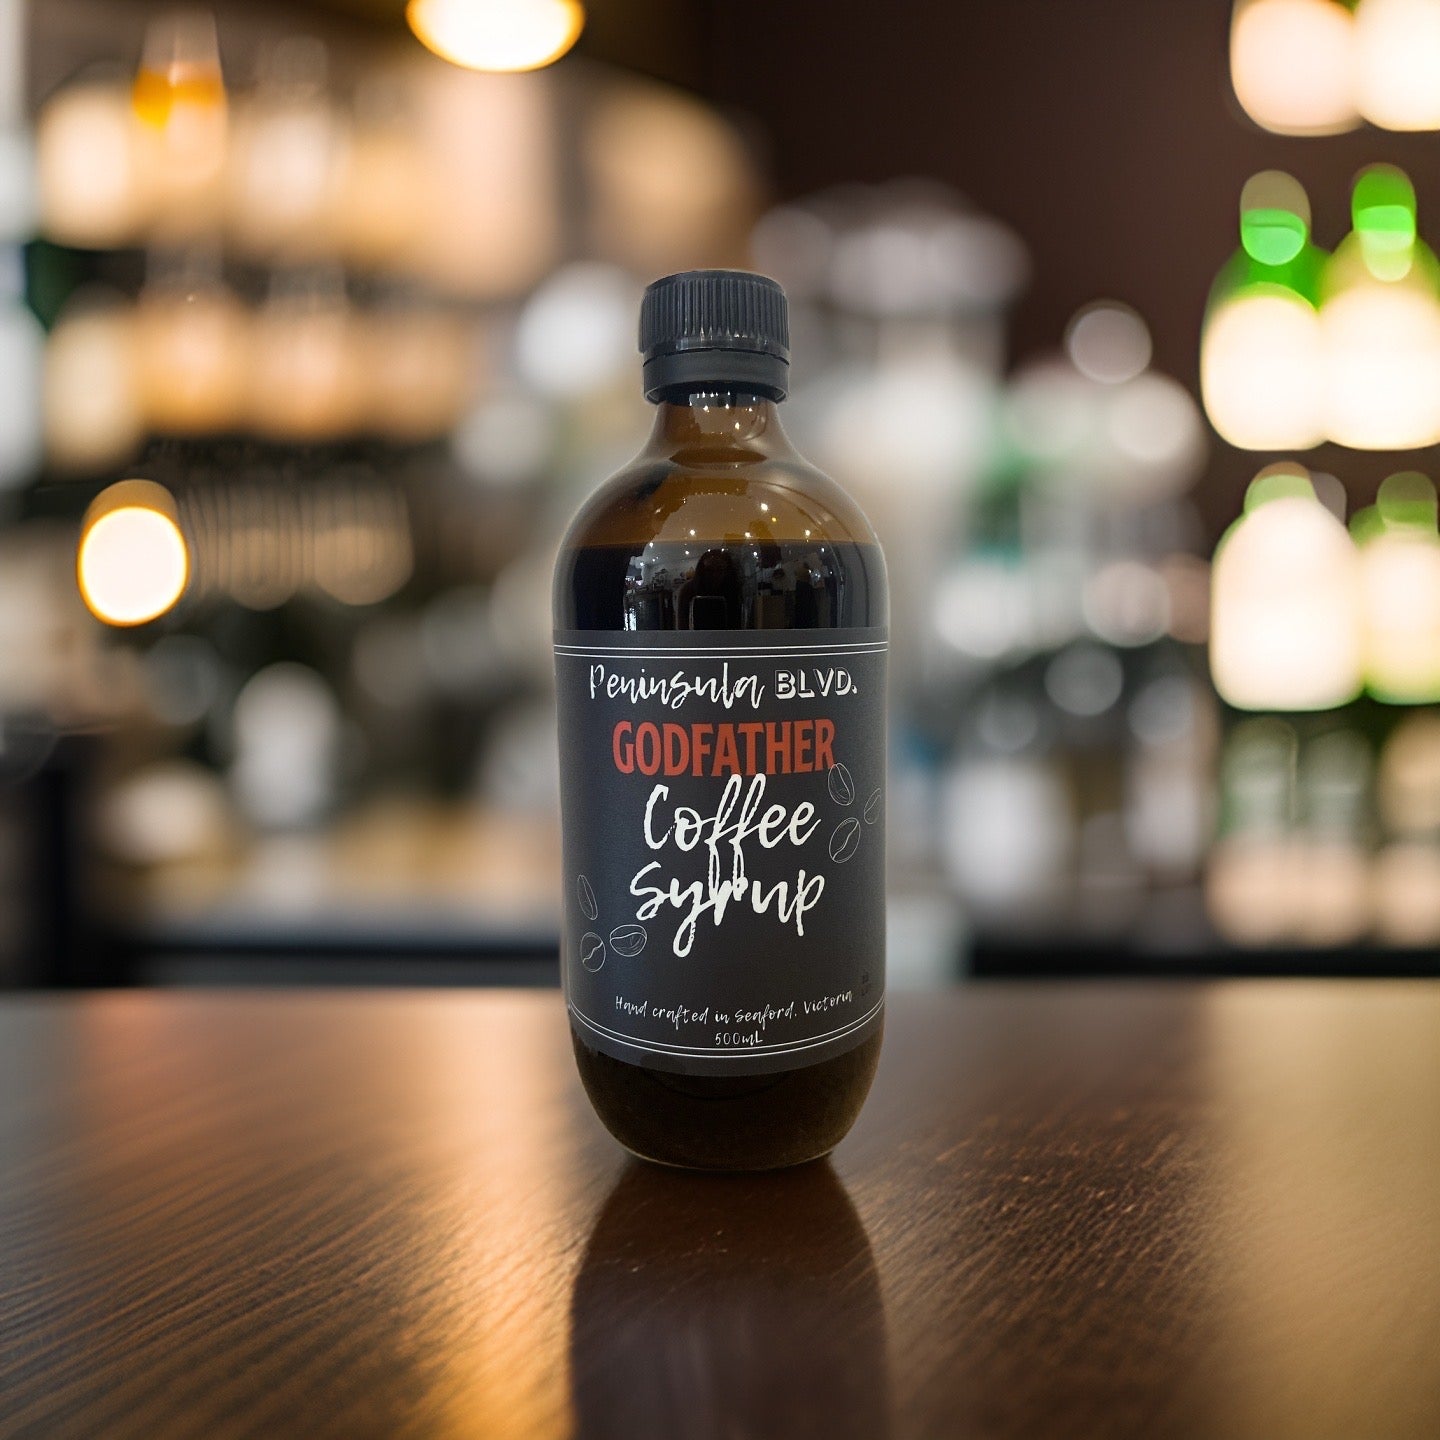 Godfather Coffee Syrup Syrup by Peninsula BLVD